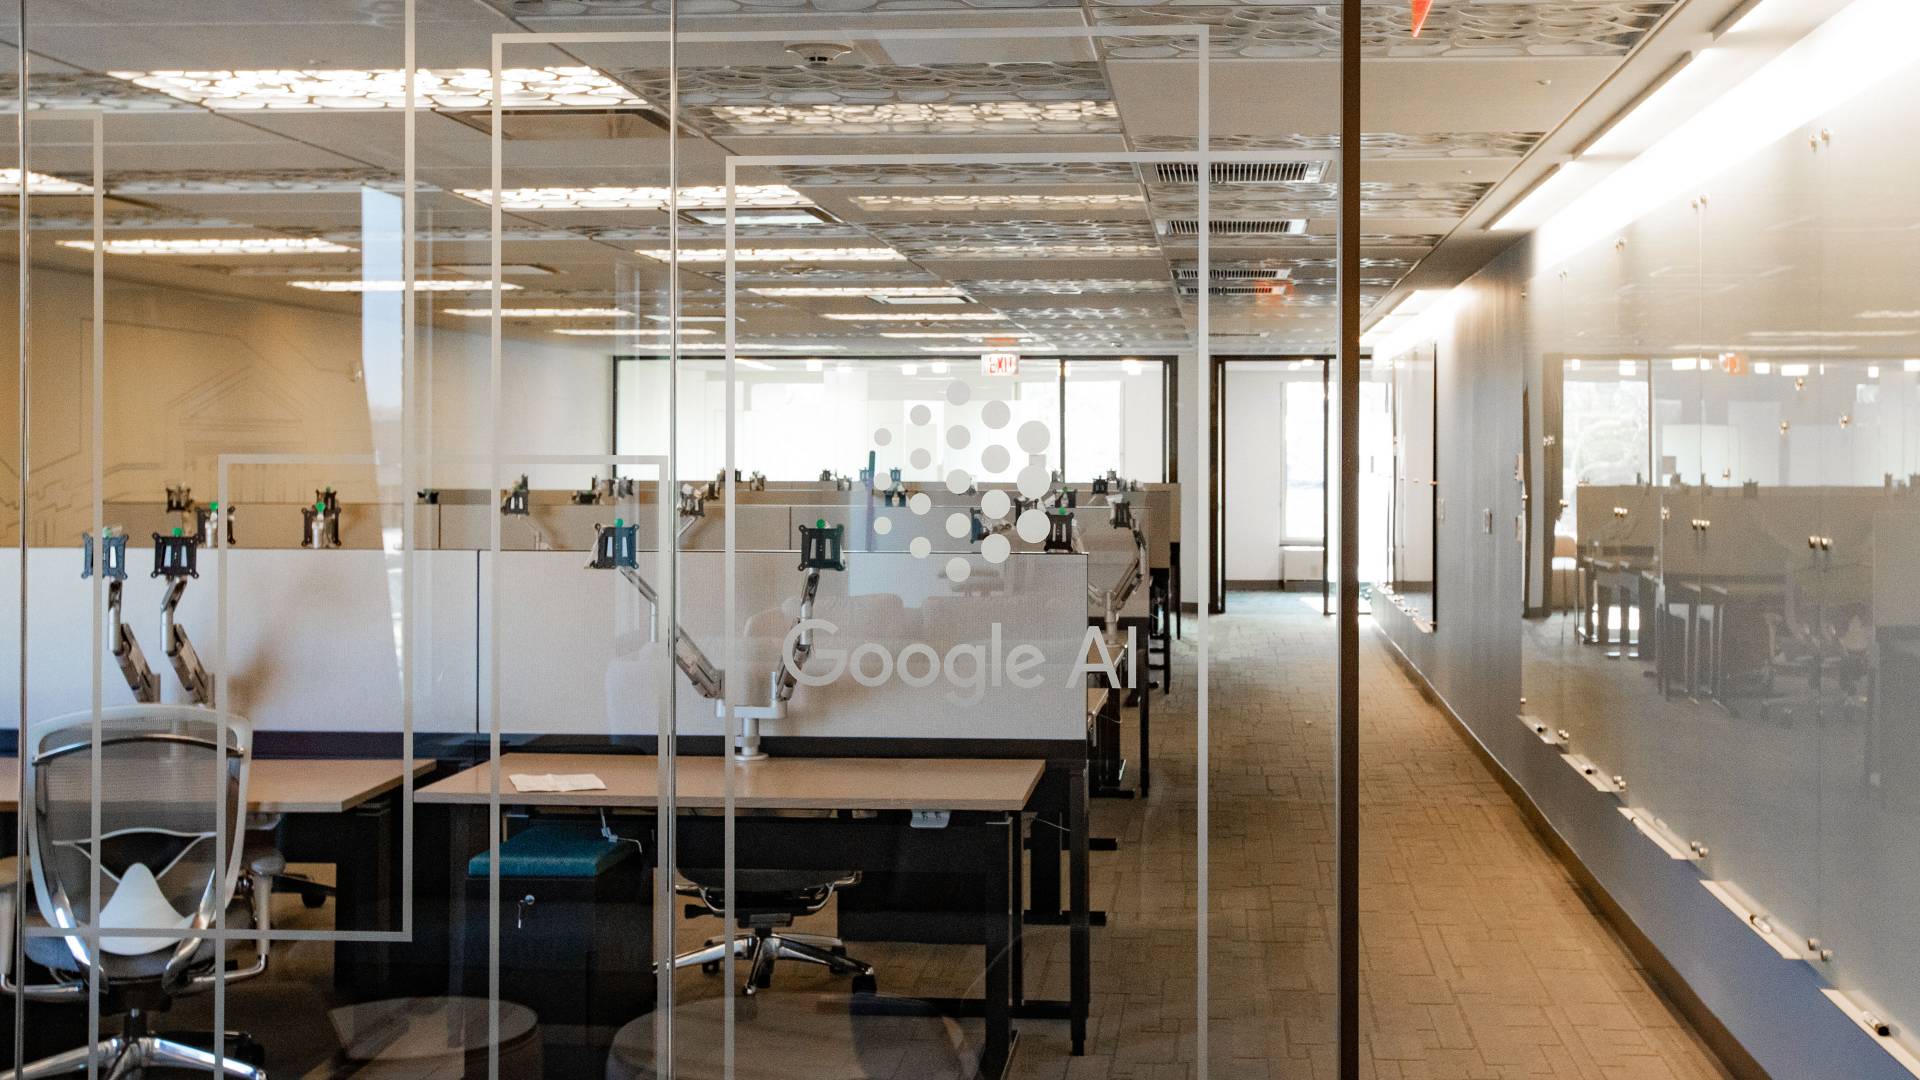 Office space with "Google AI" etched on glass door